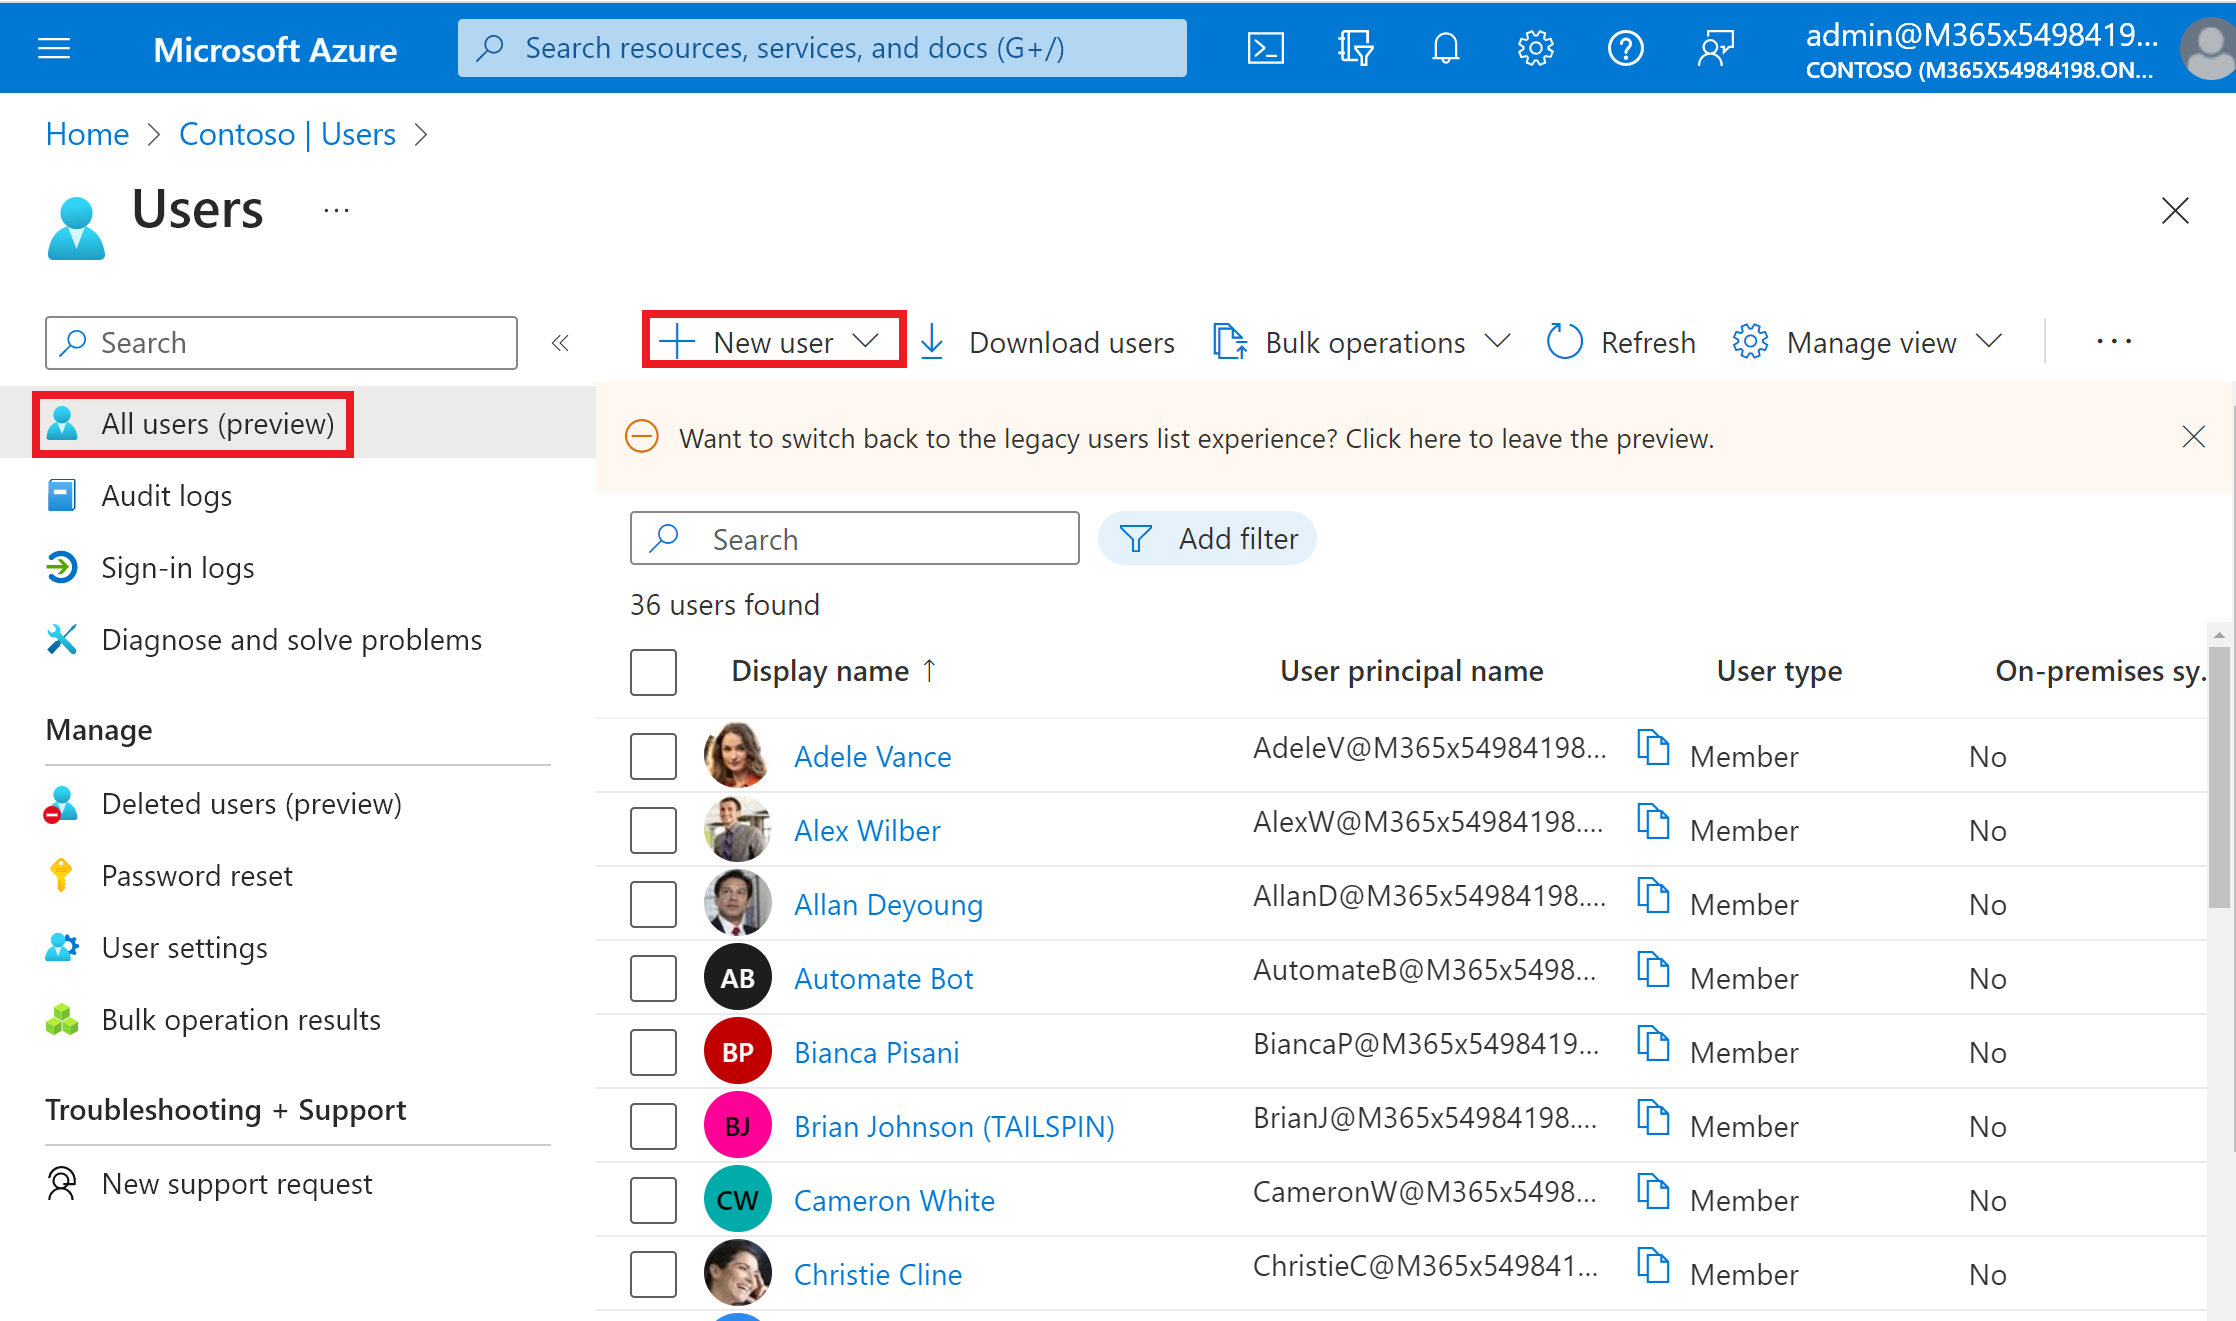 Add a new user account to your Azure AD tenant.